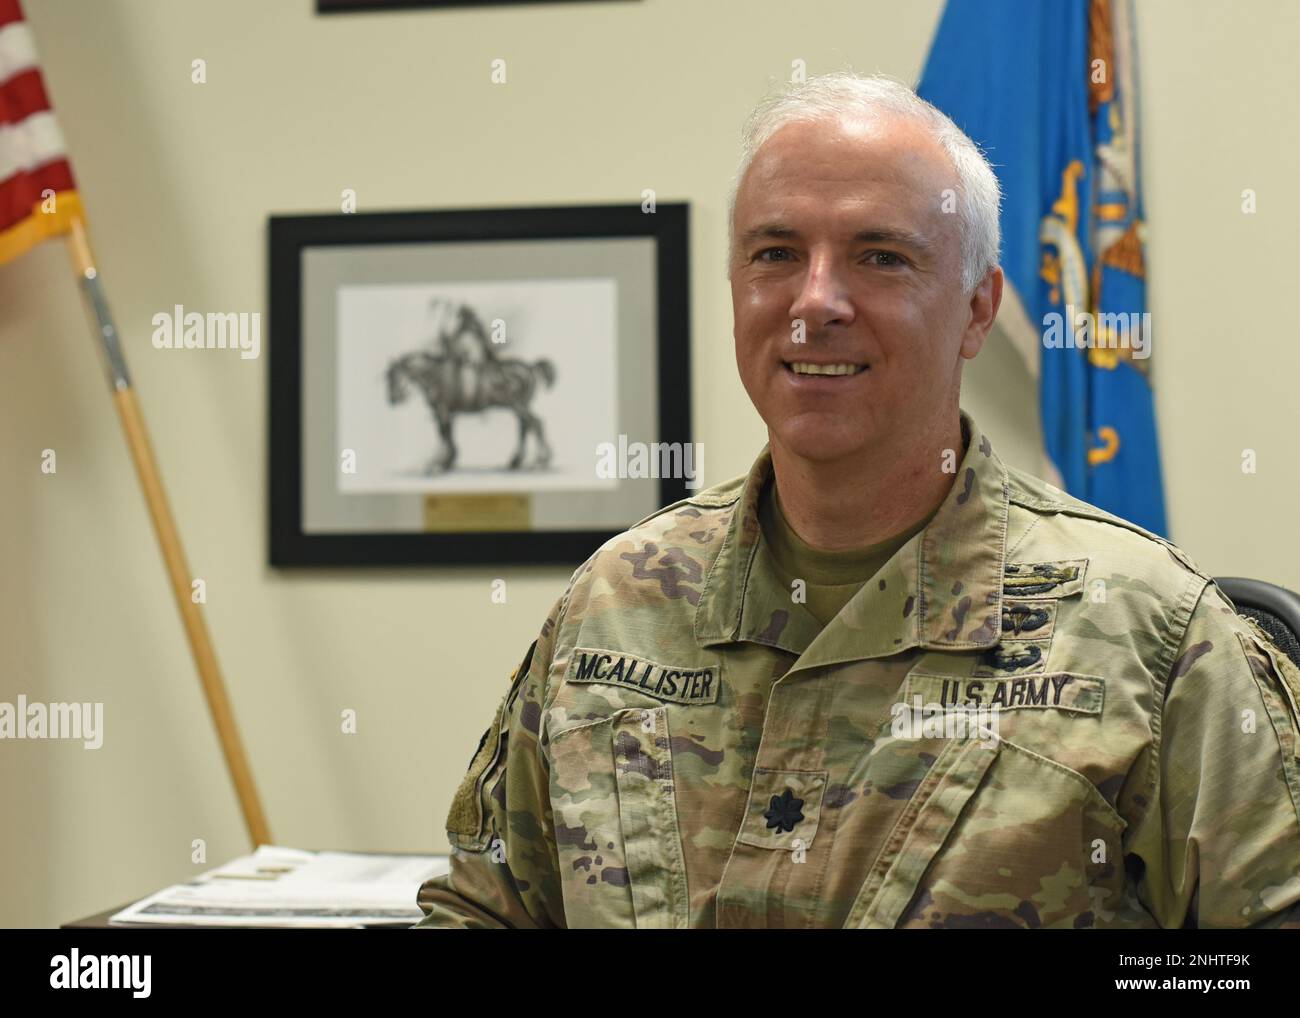 U.S. Army Lt. Col. John McAllister, 344th Military Intelligence Battalion commander, poses for a photo at his desk, Goodfellow Air Force Base, Texas, August 2, 2022. McAllister assumed command of the 344th MI BN on June 21. Stock Photo